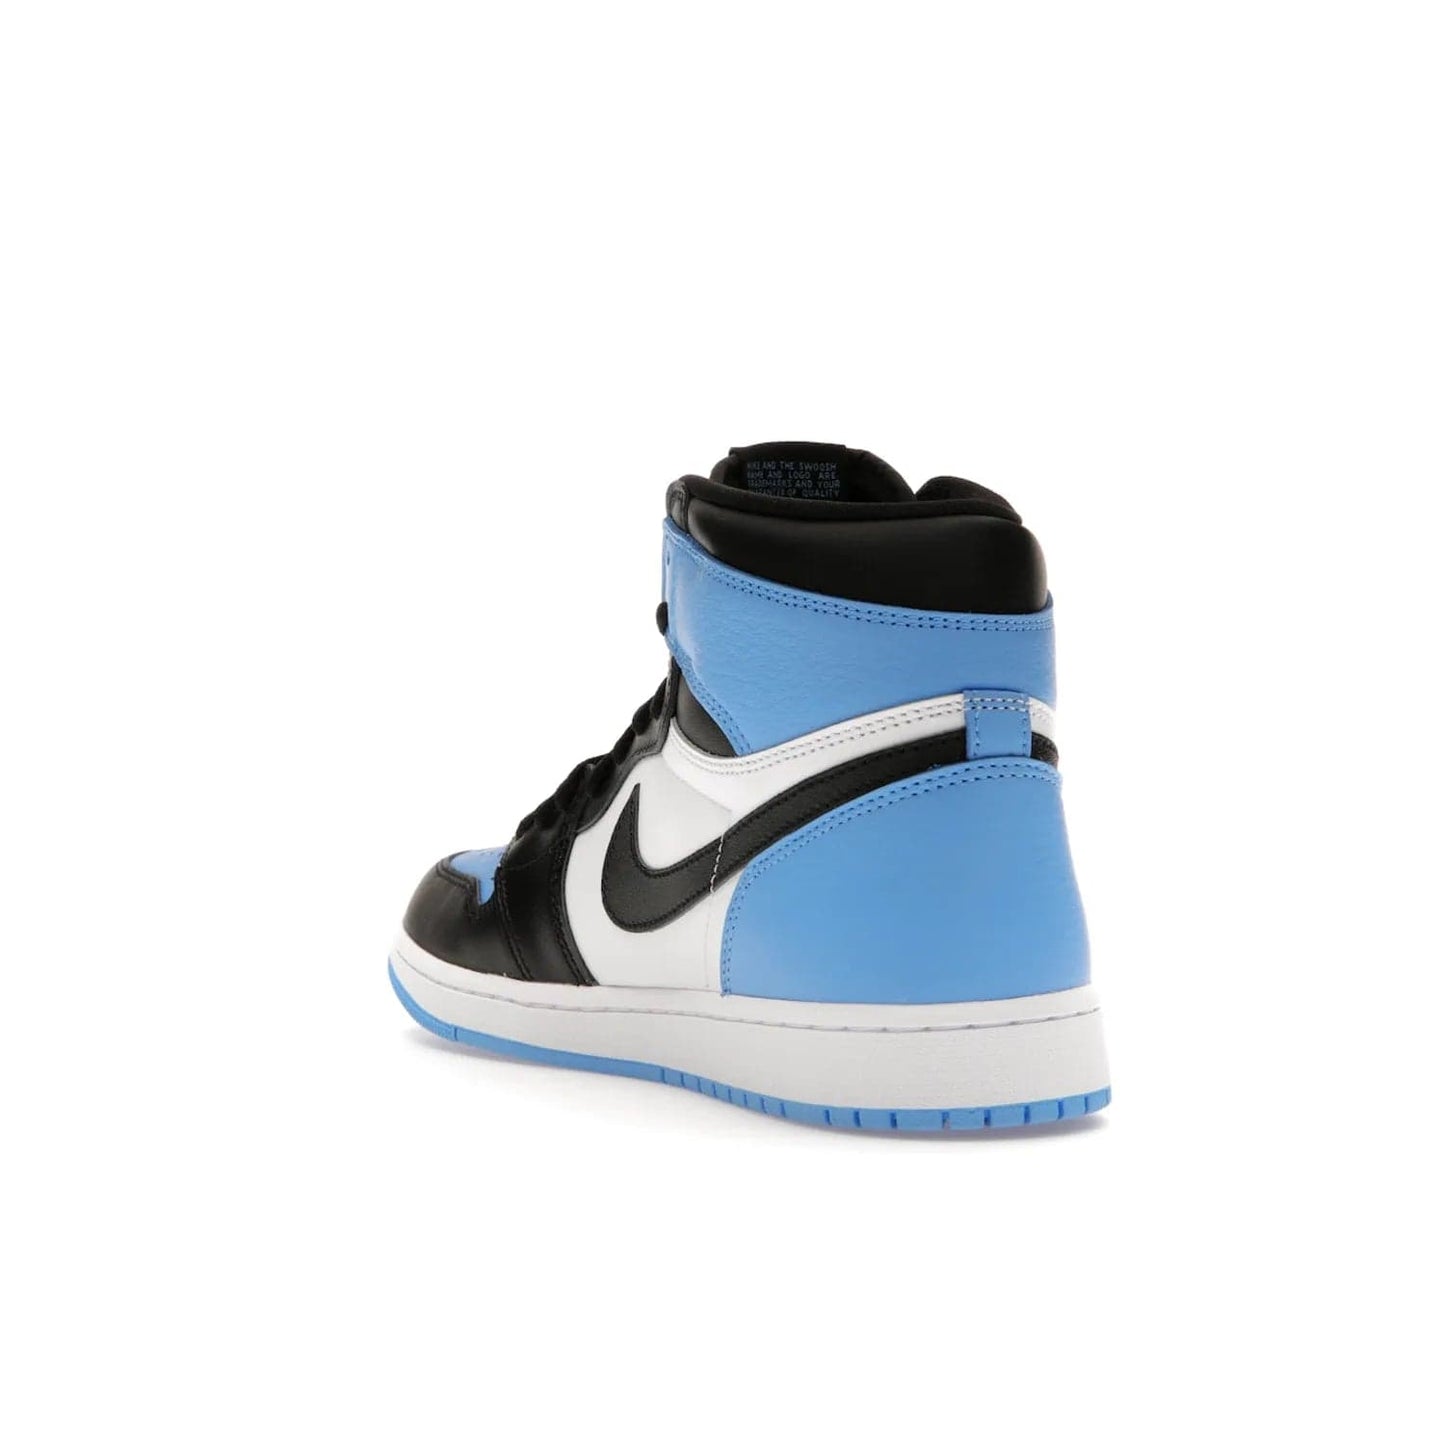 Jordan 1 Retro High OG UNC Toe - Image 25 - Only at www.BallersClubKickz.com - Jordan 1 High OG UNC Toe is a fashionable, high-quality sneaker featuring University Blue, Black White and White. Releasing July 22, 2023, it's the perfect pick up for sneakerheads.